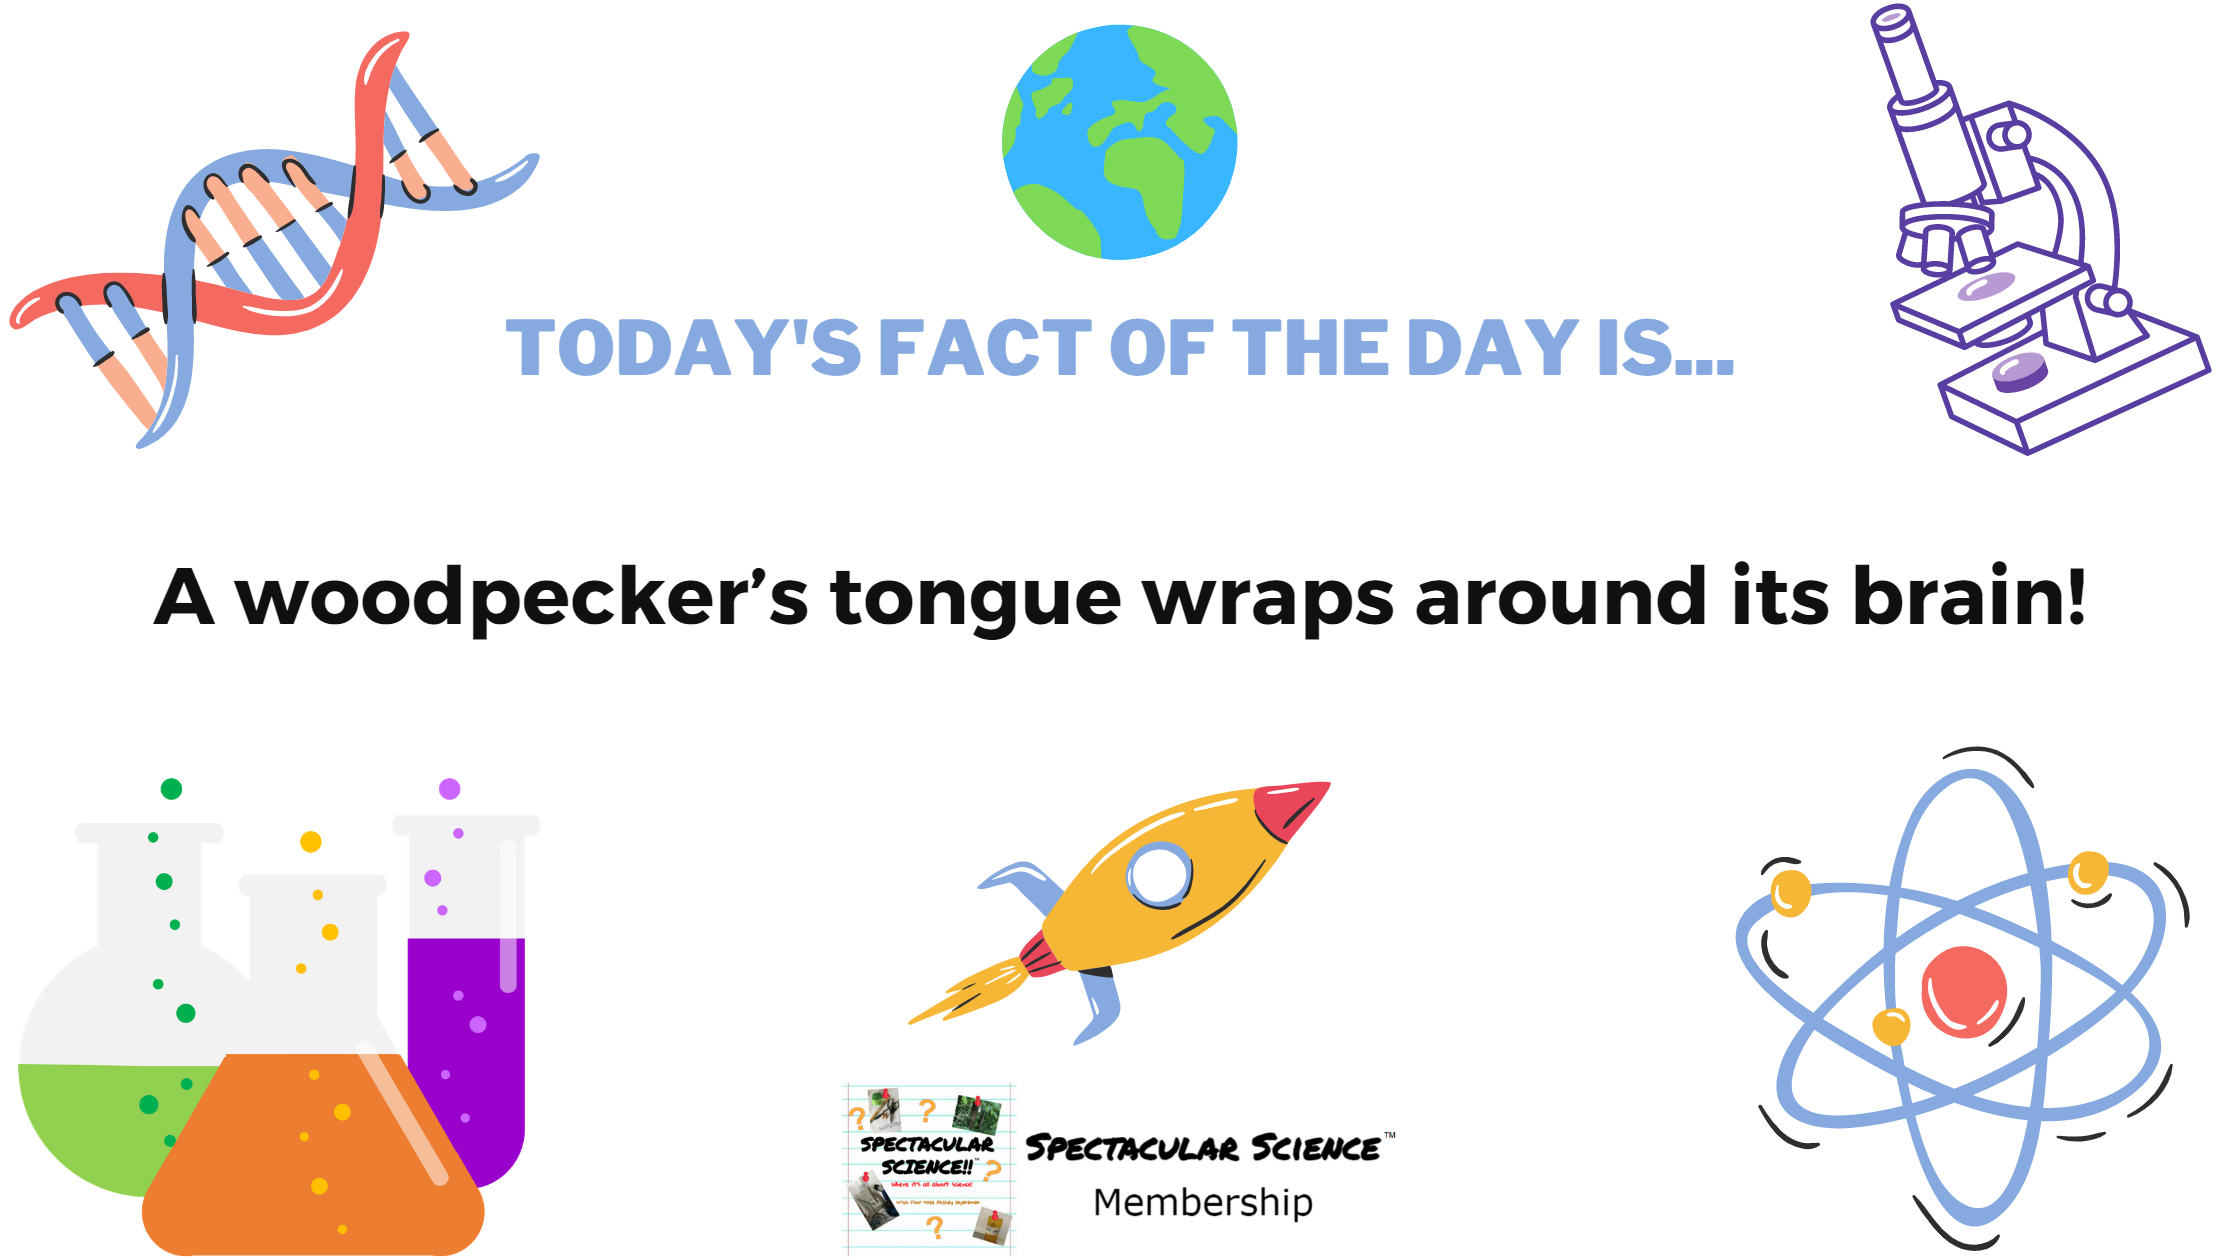 Fact of the Day Image May 3rd